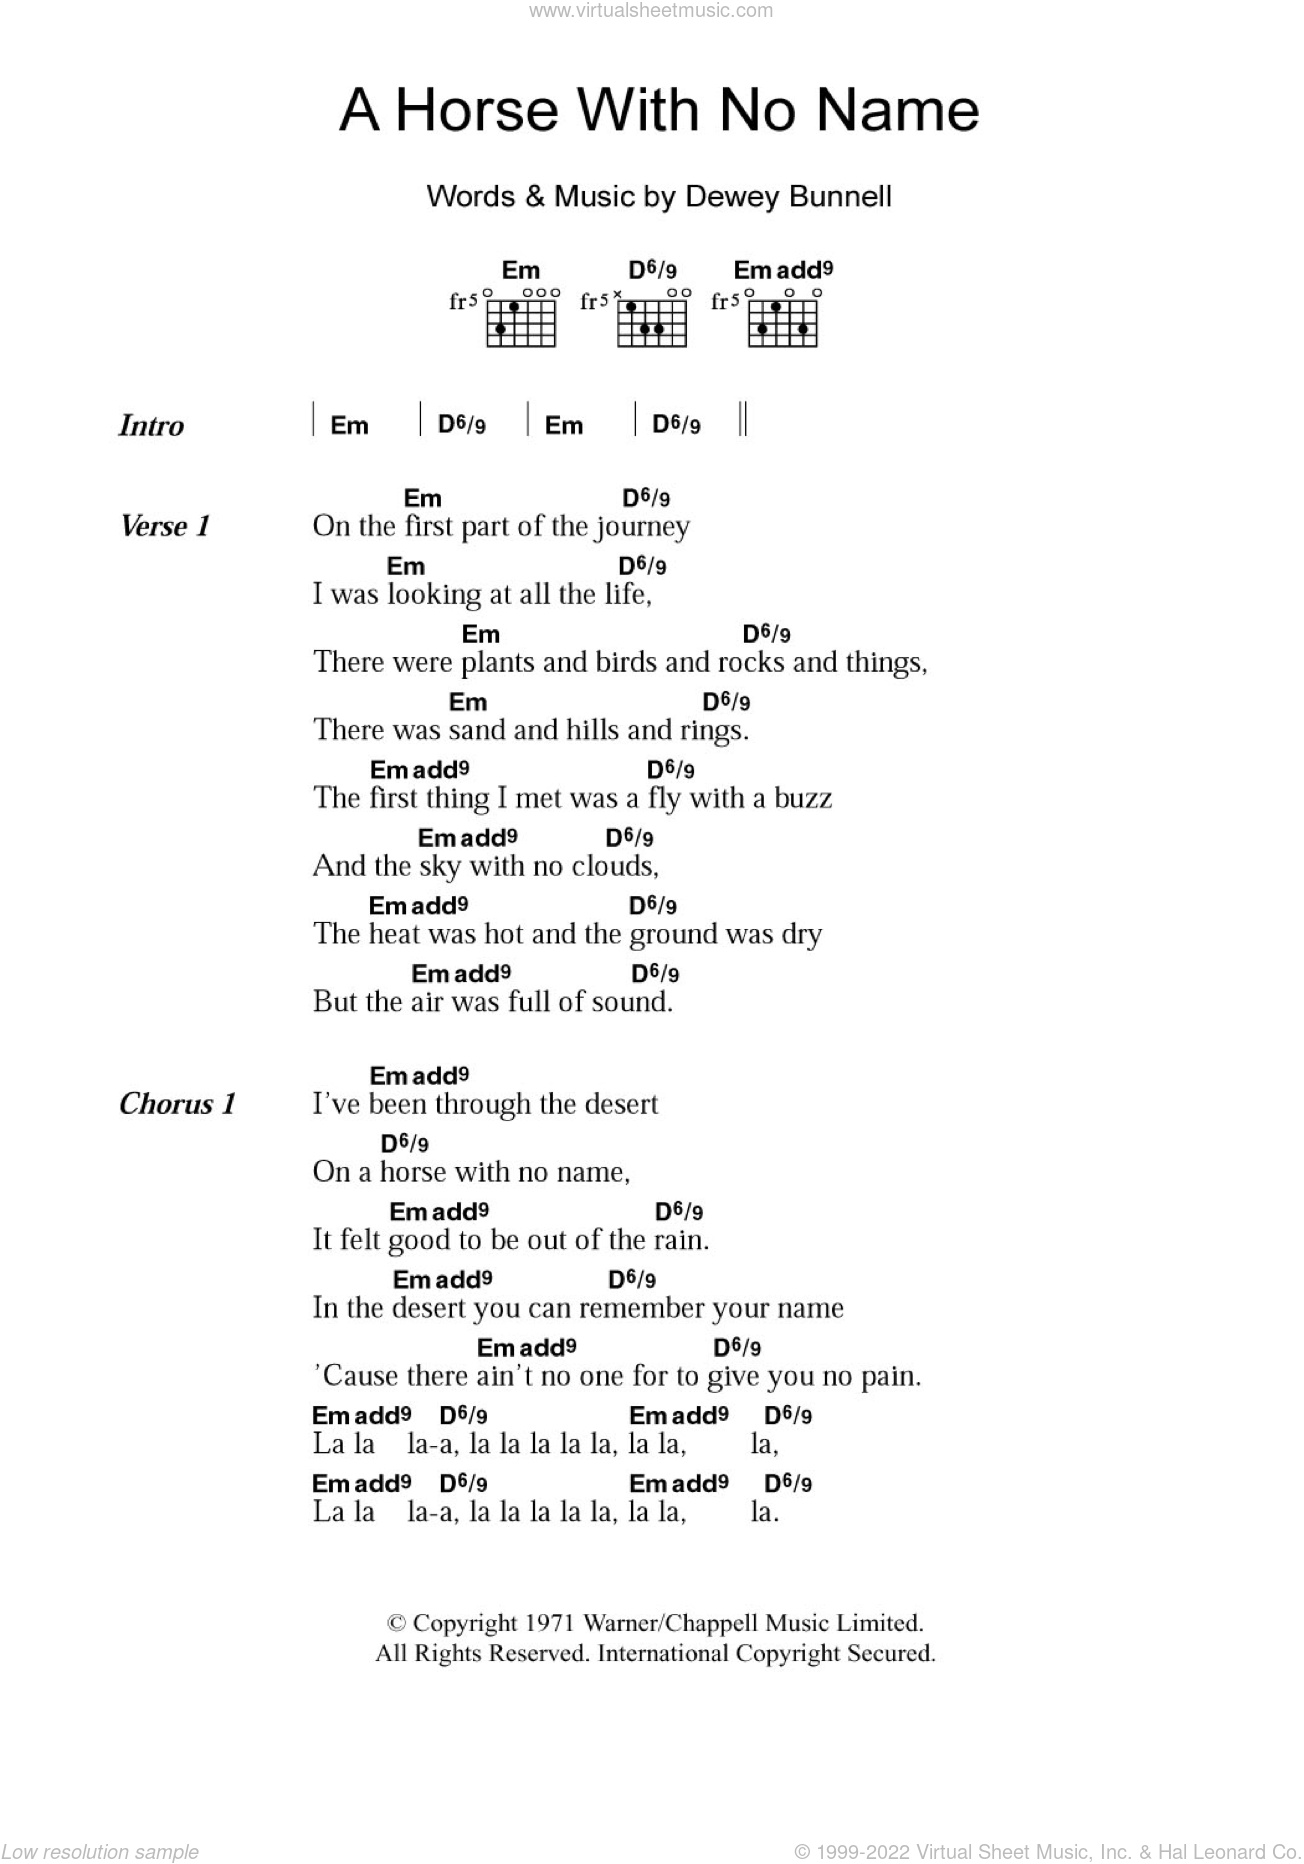 A Horse With No Name sheet music for guitar (chords) (PDF)